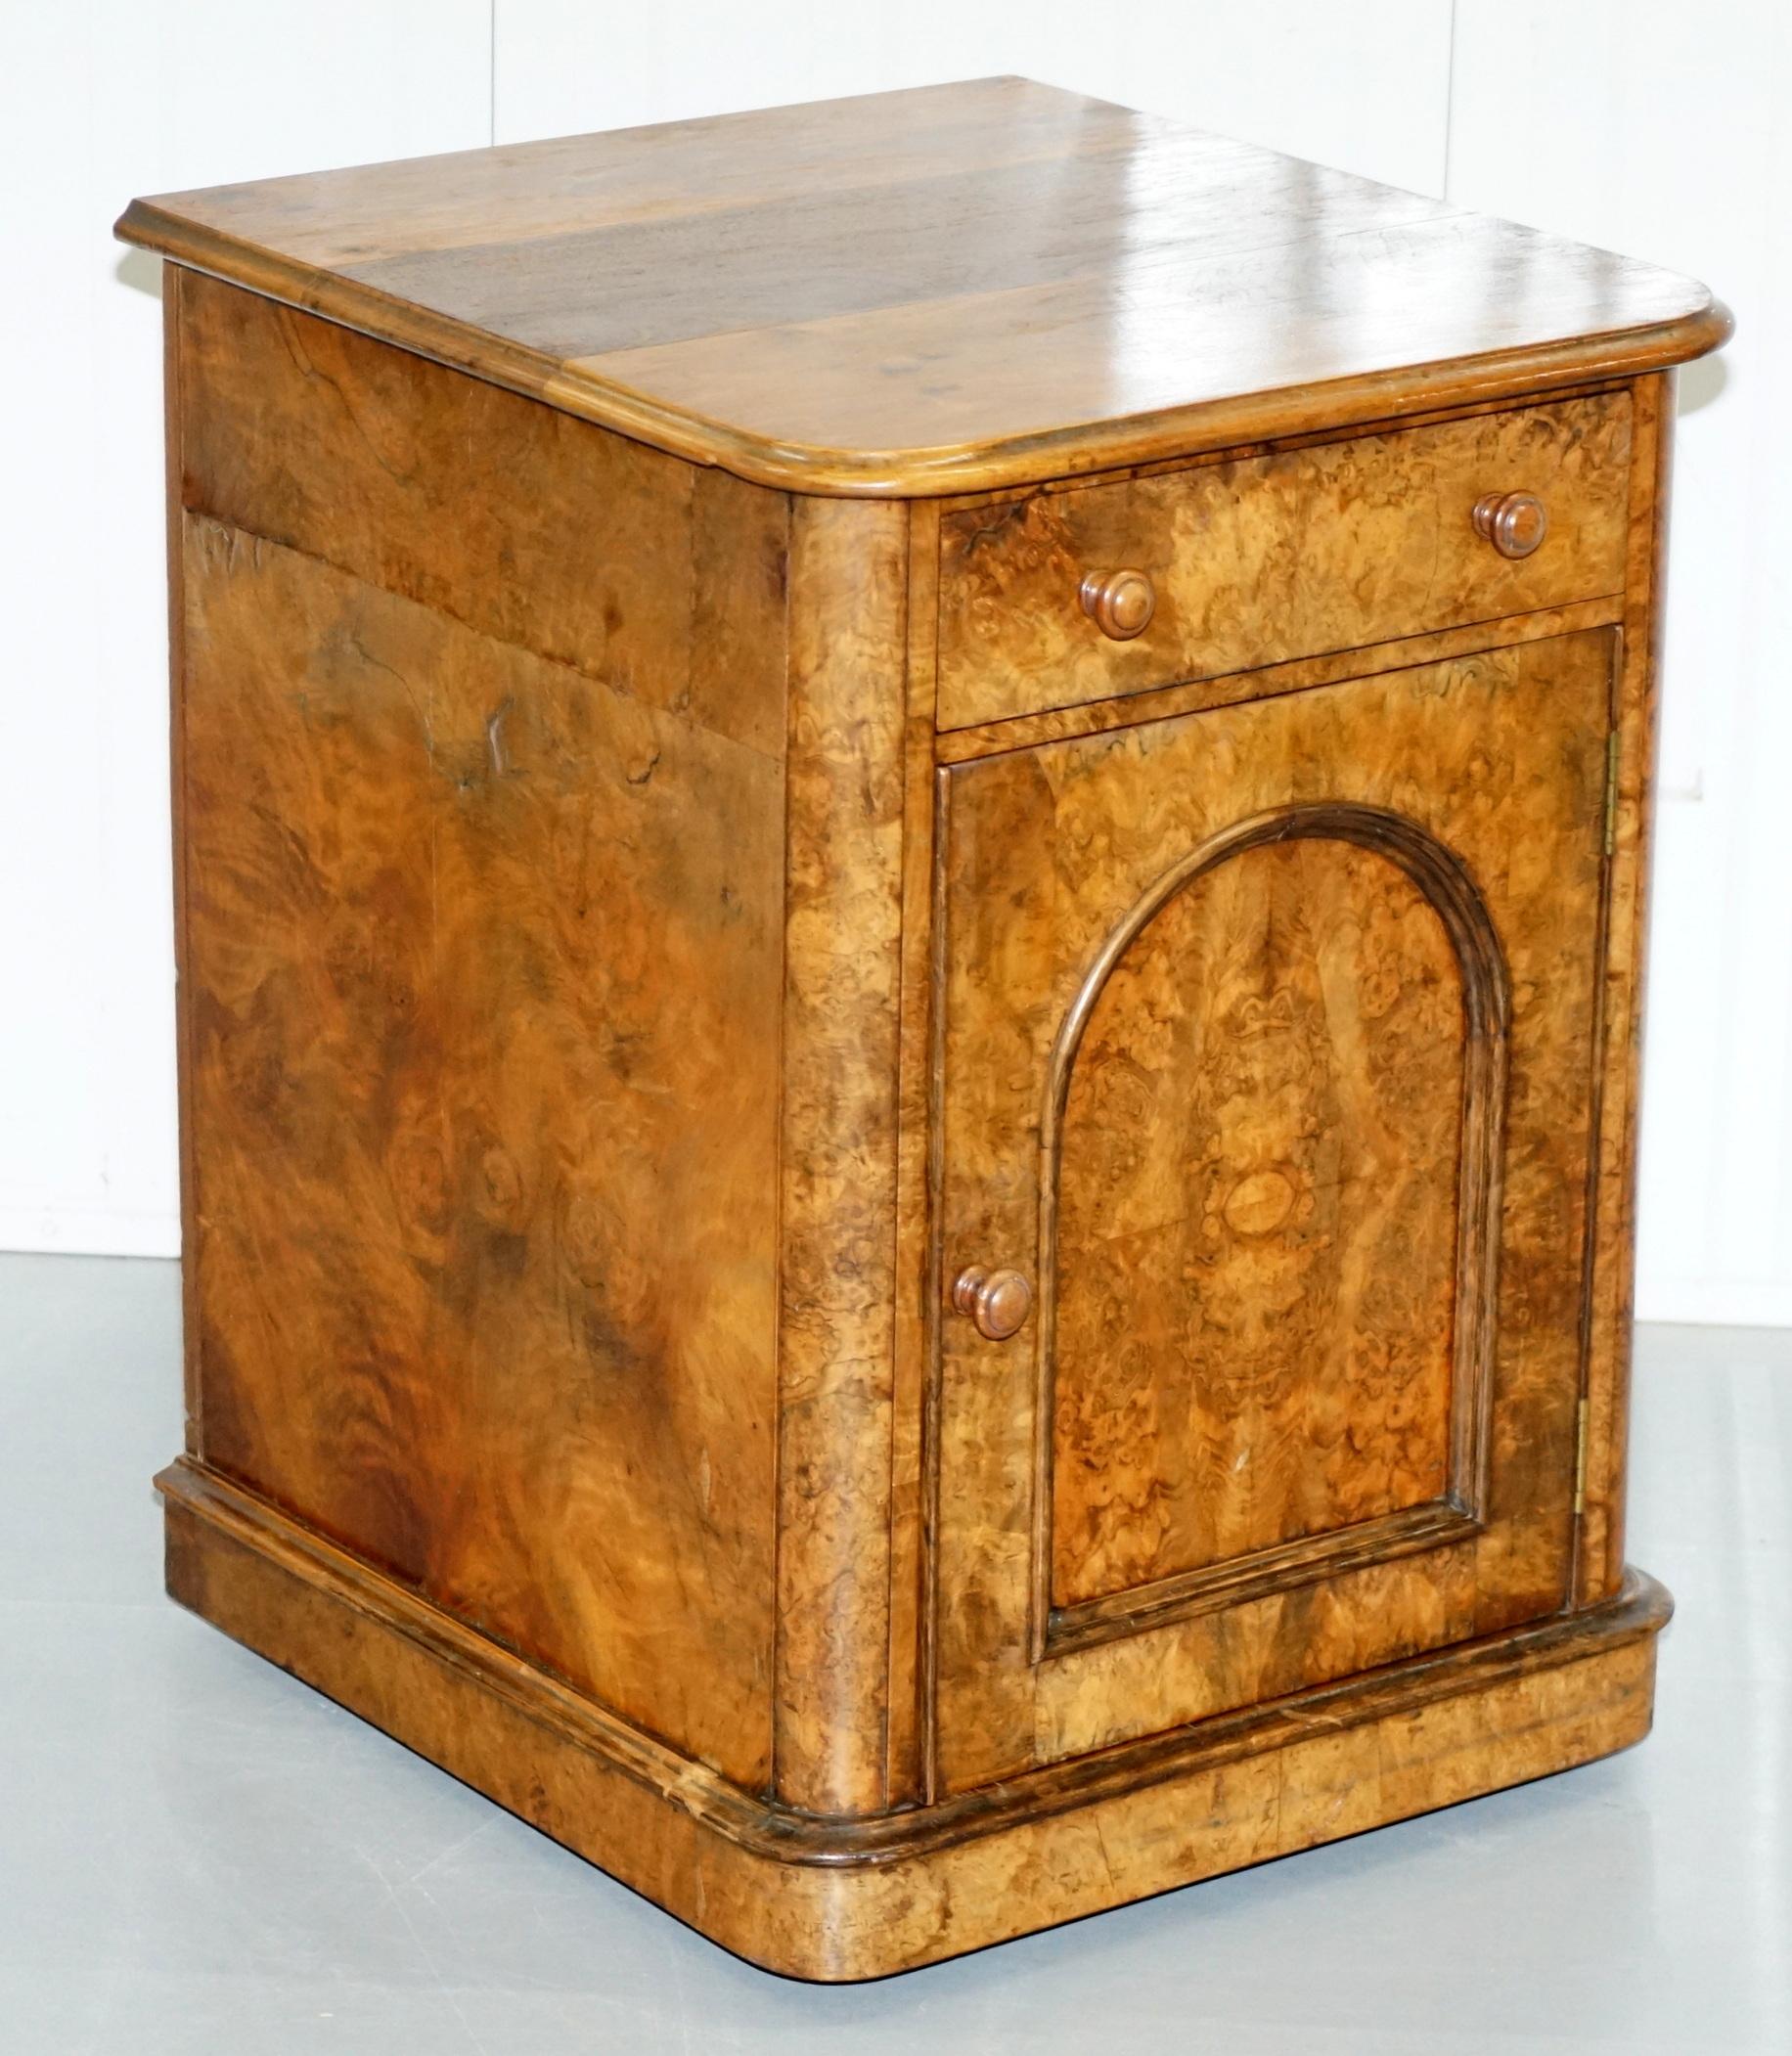 We are delighted to offer for sale this lovely oversized side cabinet with stunning burr walnut finish

A good looking and well-made piece, it looks to me like it used to be part of a different piece of furniture and was repurposed to be a more